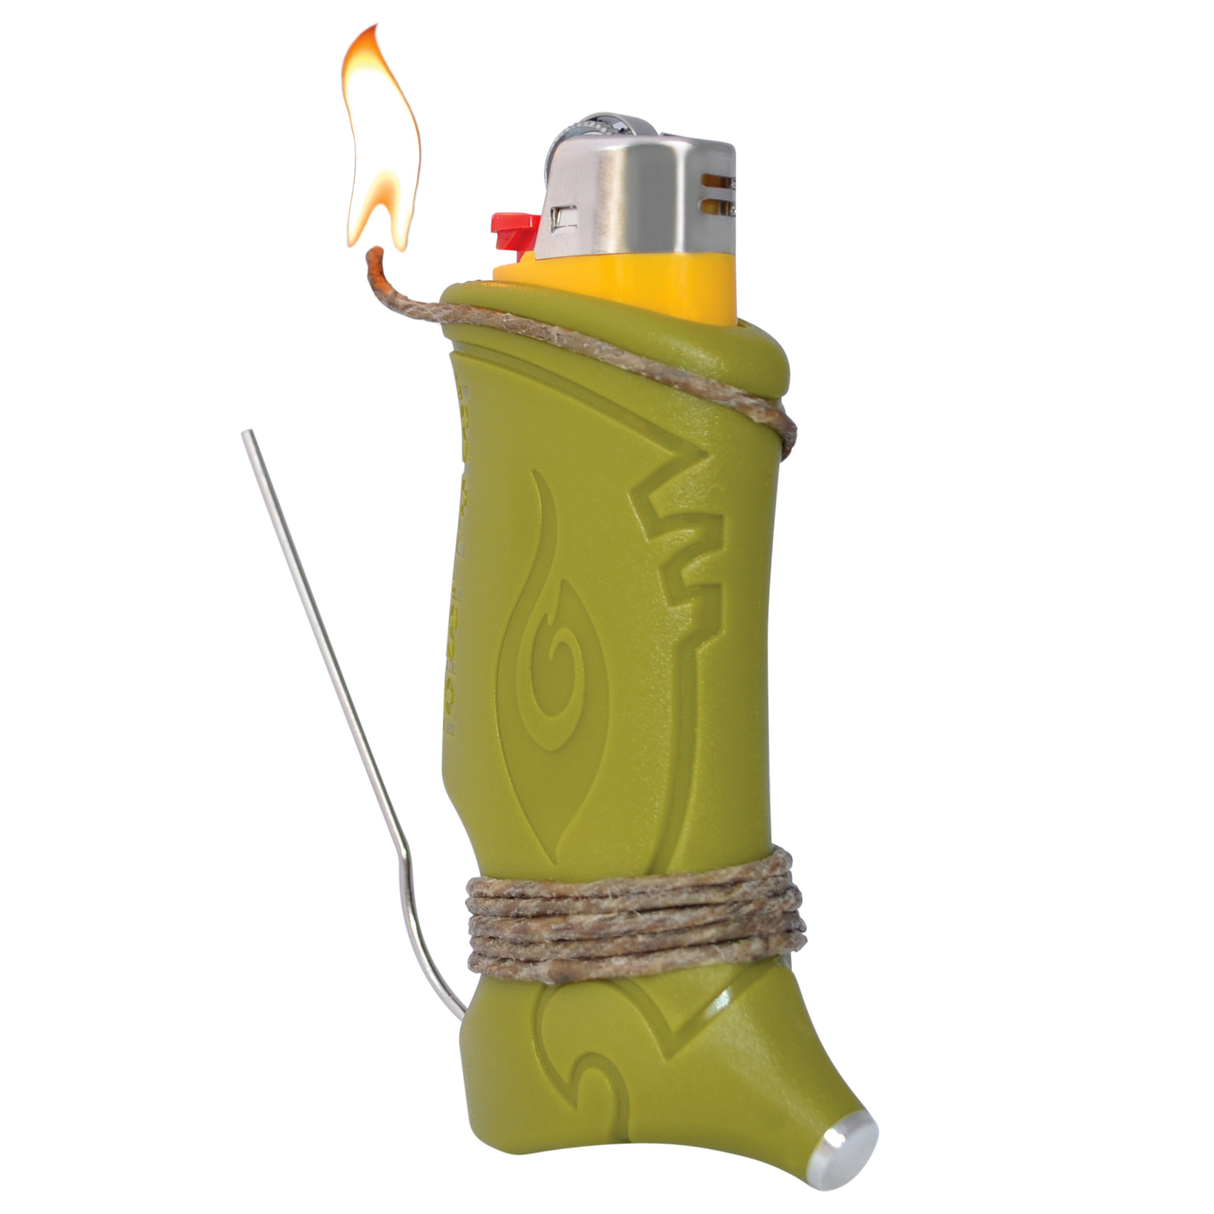 Toker Poker Lighter Sleeve in Green with Hemp Wick - Angled View with Flame